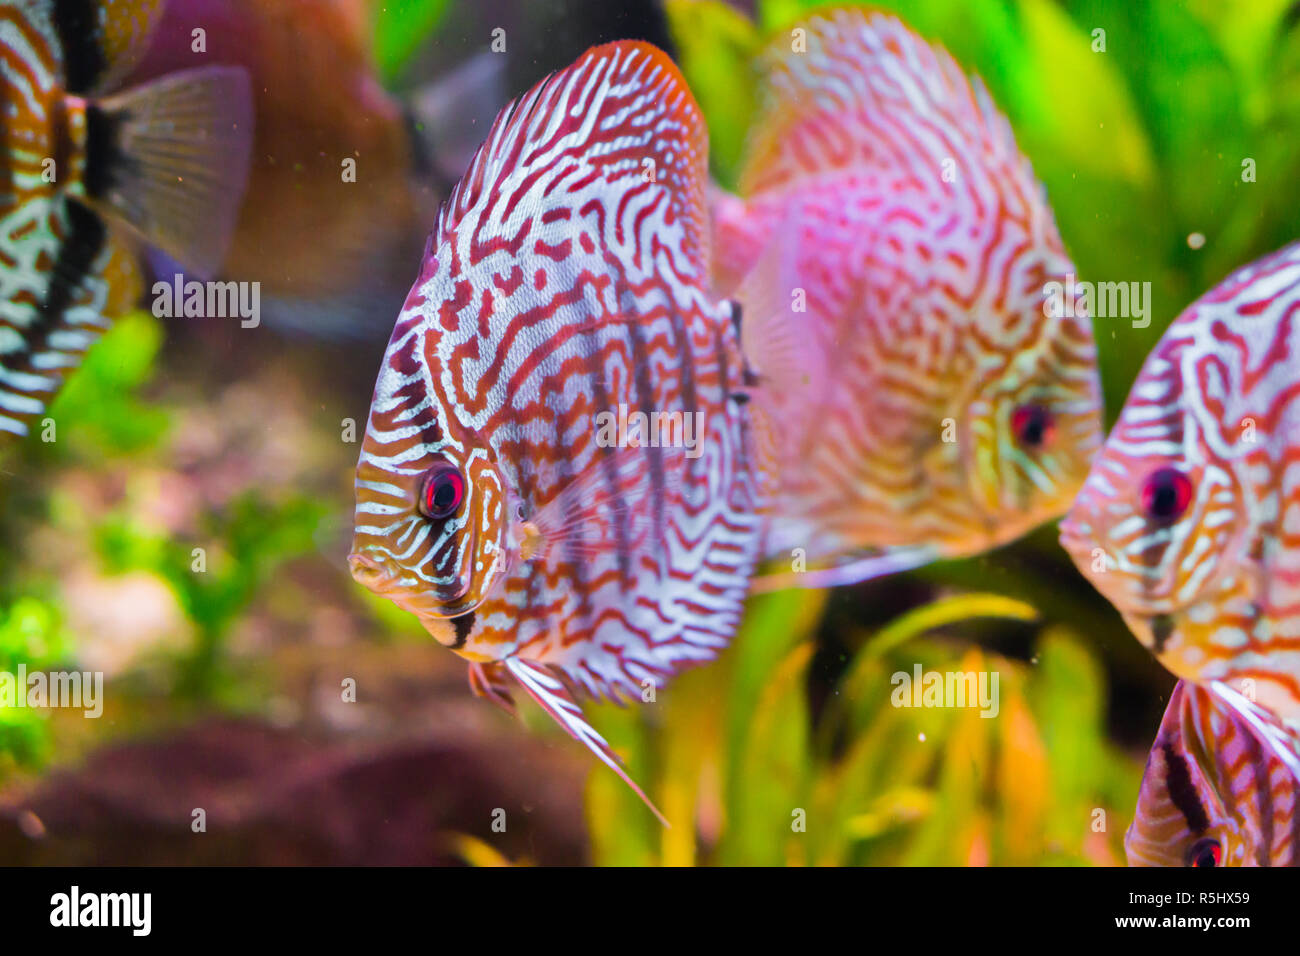 beautiful red turquoise discus fish in closeup with 2 other discus fishes in the background, a tropical cichlid fish from the amazon basin Stock Photo